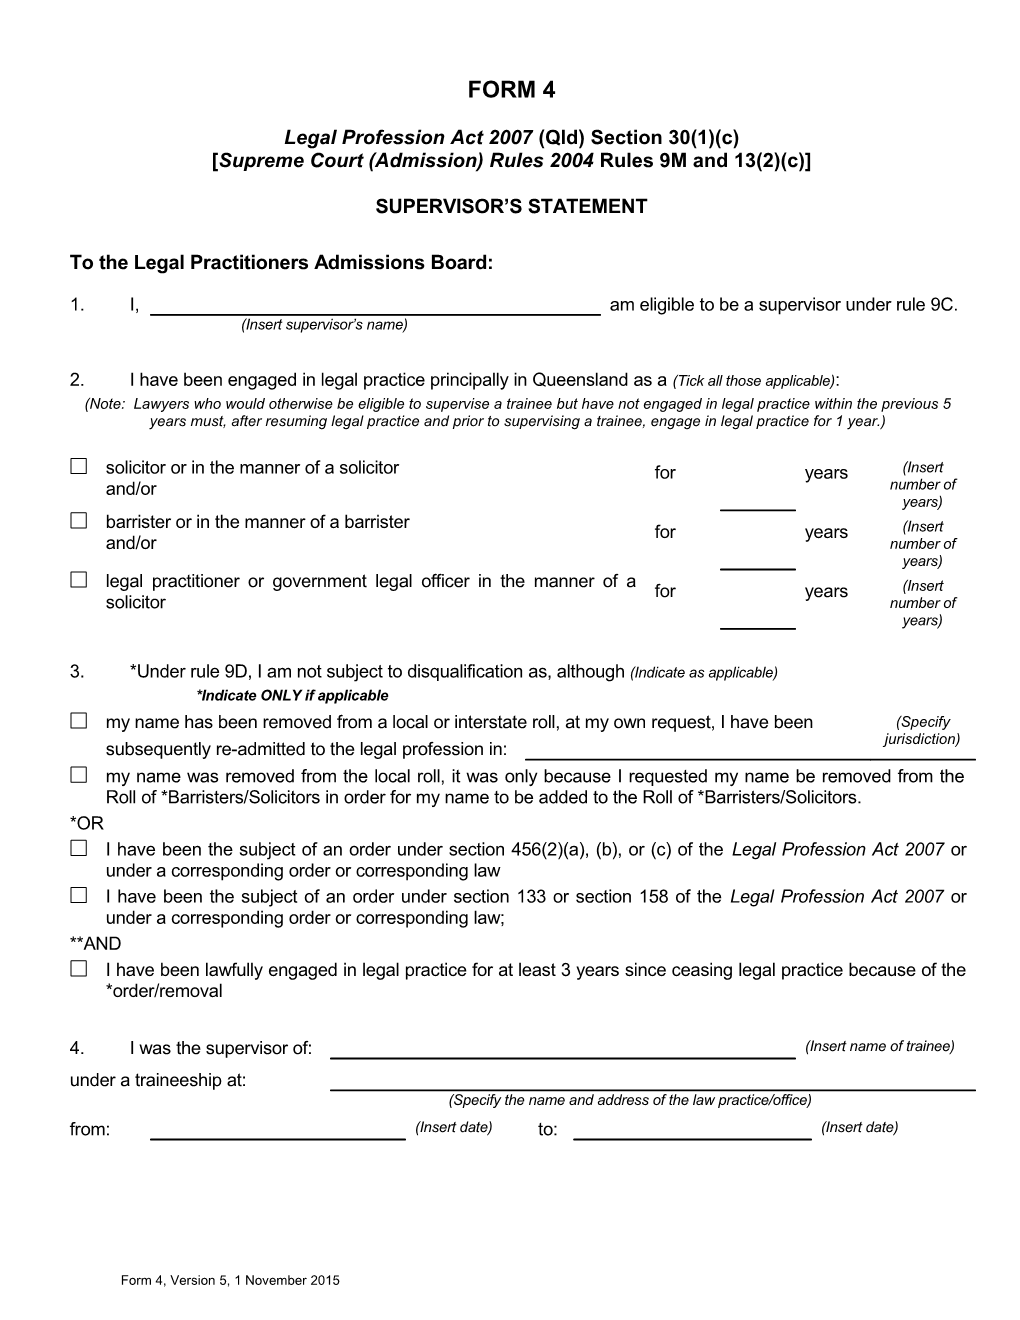 Legal Practitioner Admissions Rules 2004 - Form 4